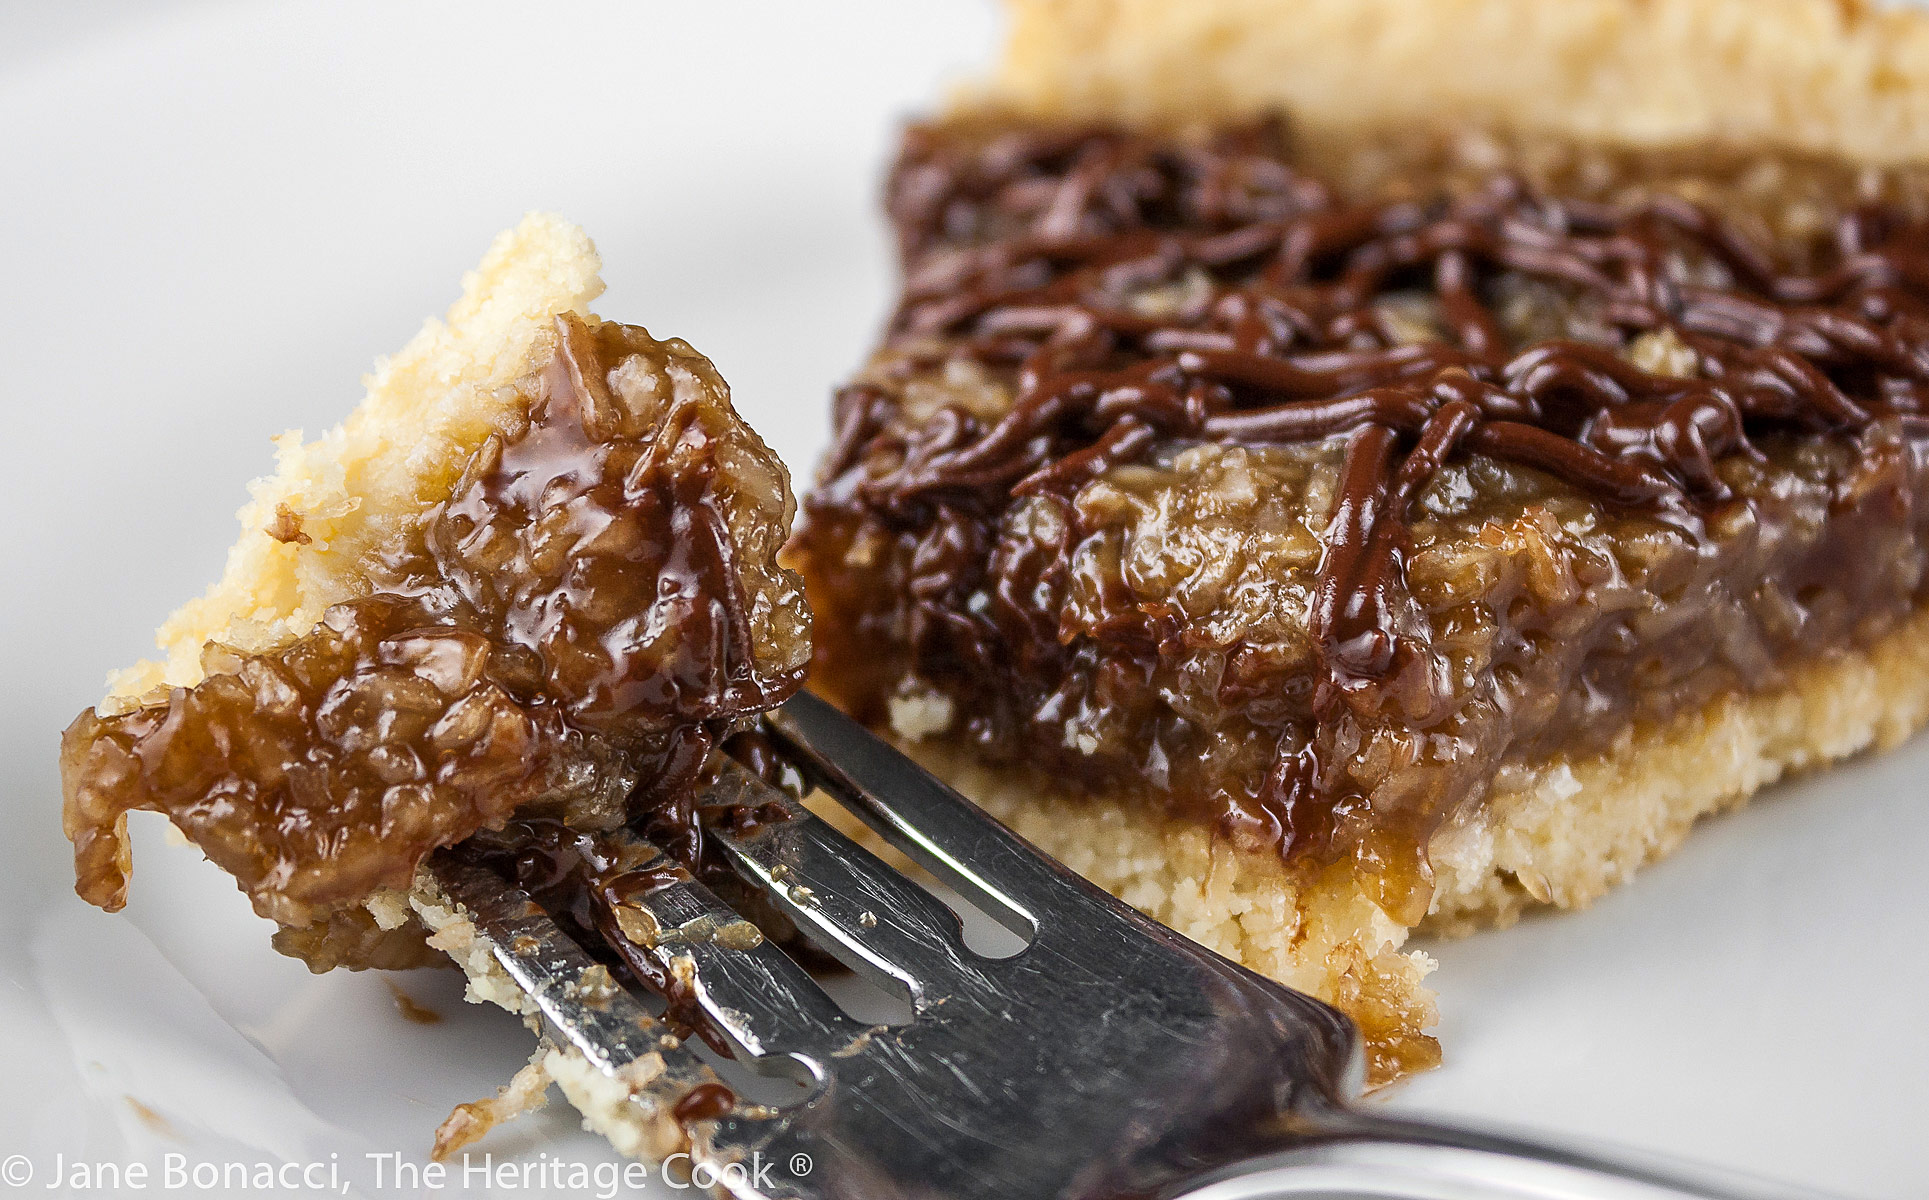 Coconut Caramel Cookie Tart that tastes like a Samoa Girl Scout Cookie; beautiful wedge of the tart drizzled with chocolate and ready to dive into © 2023 Jane Bonacci, The Heritage Cook.